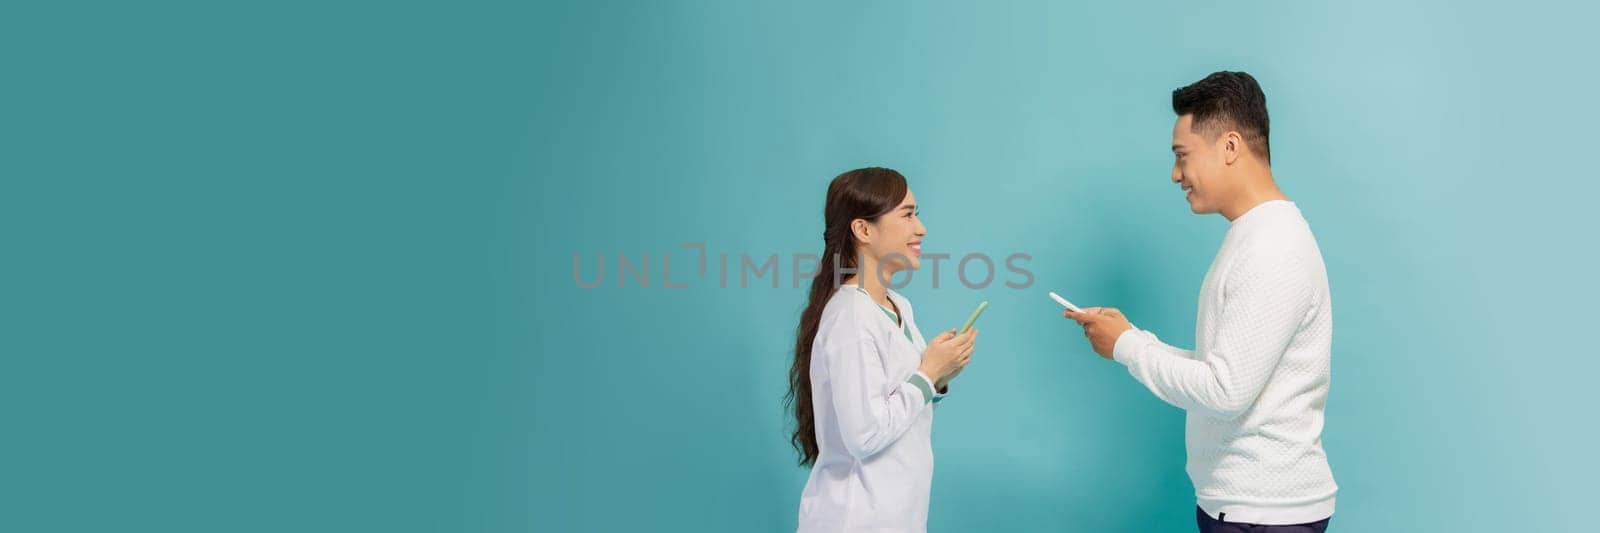 Asian girl and guy using phones sending and reading messages, standing against blue background facing each other by makidotvn